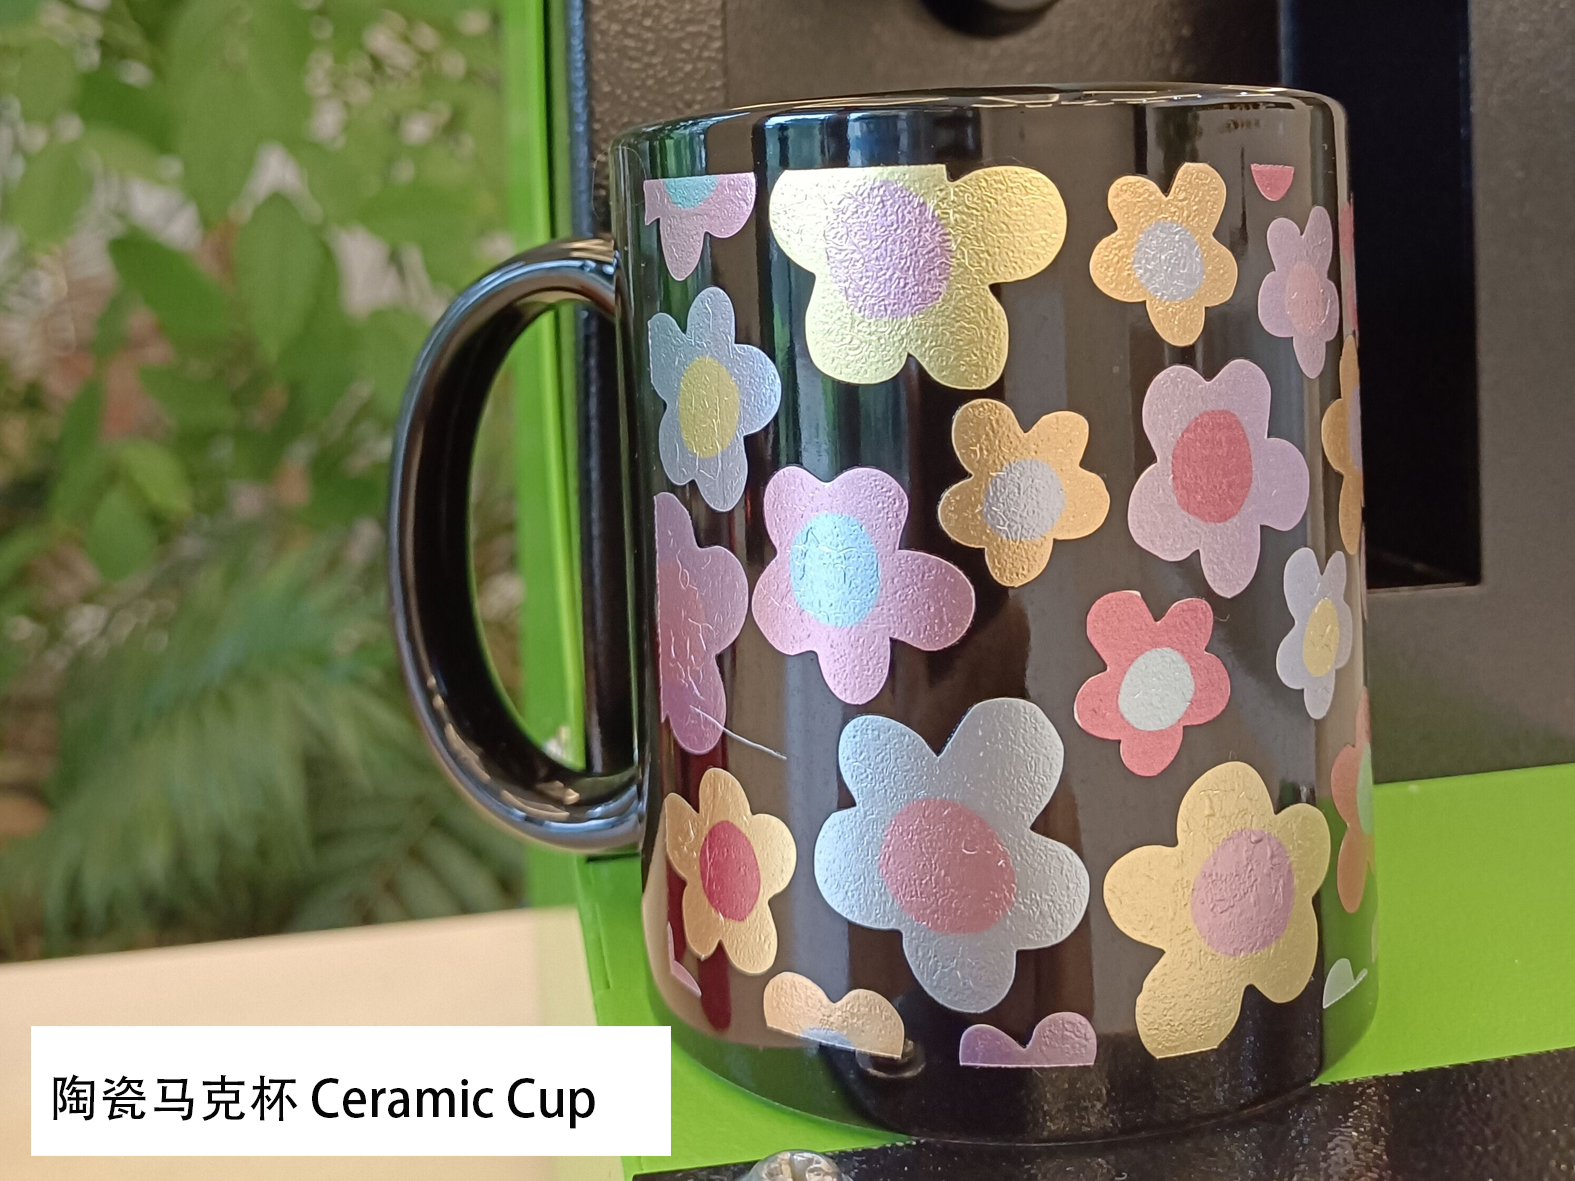 https://www.alizarinchina.com/solutions/ Which-investment-is-best-for-beginner-to-make-the-colorful-logo-of-ceramic-mug/